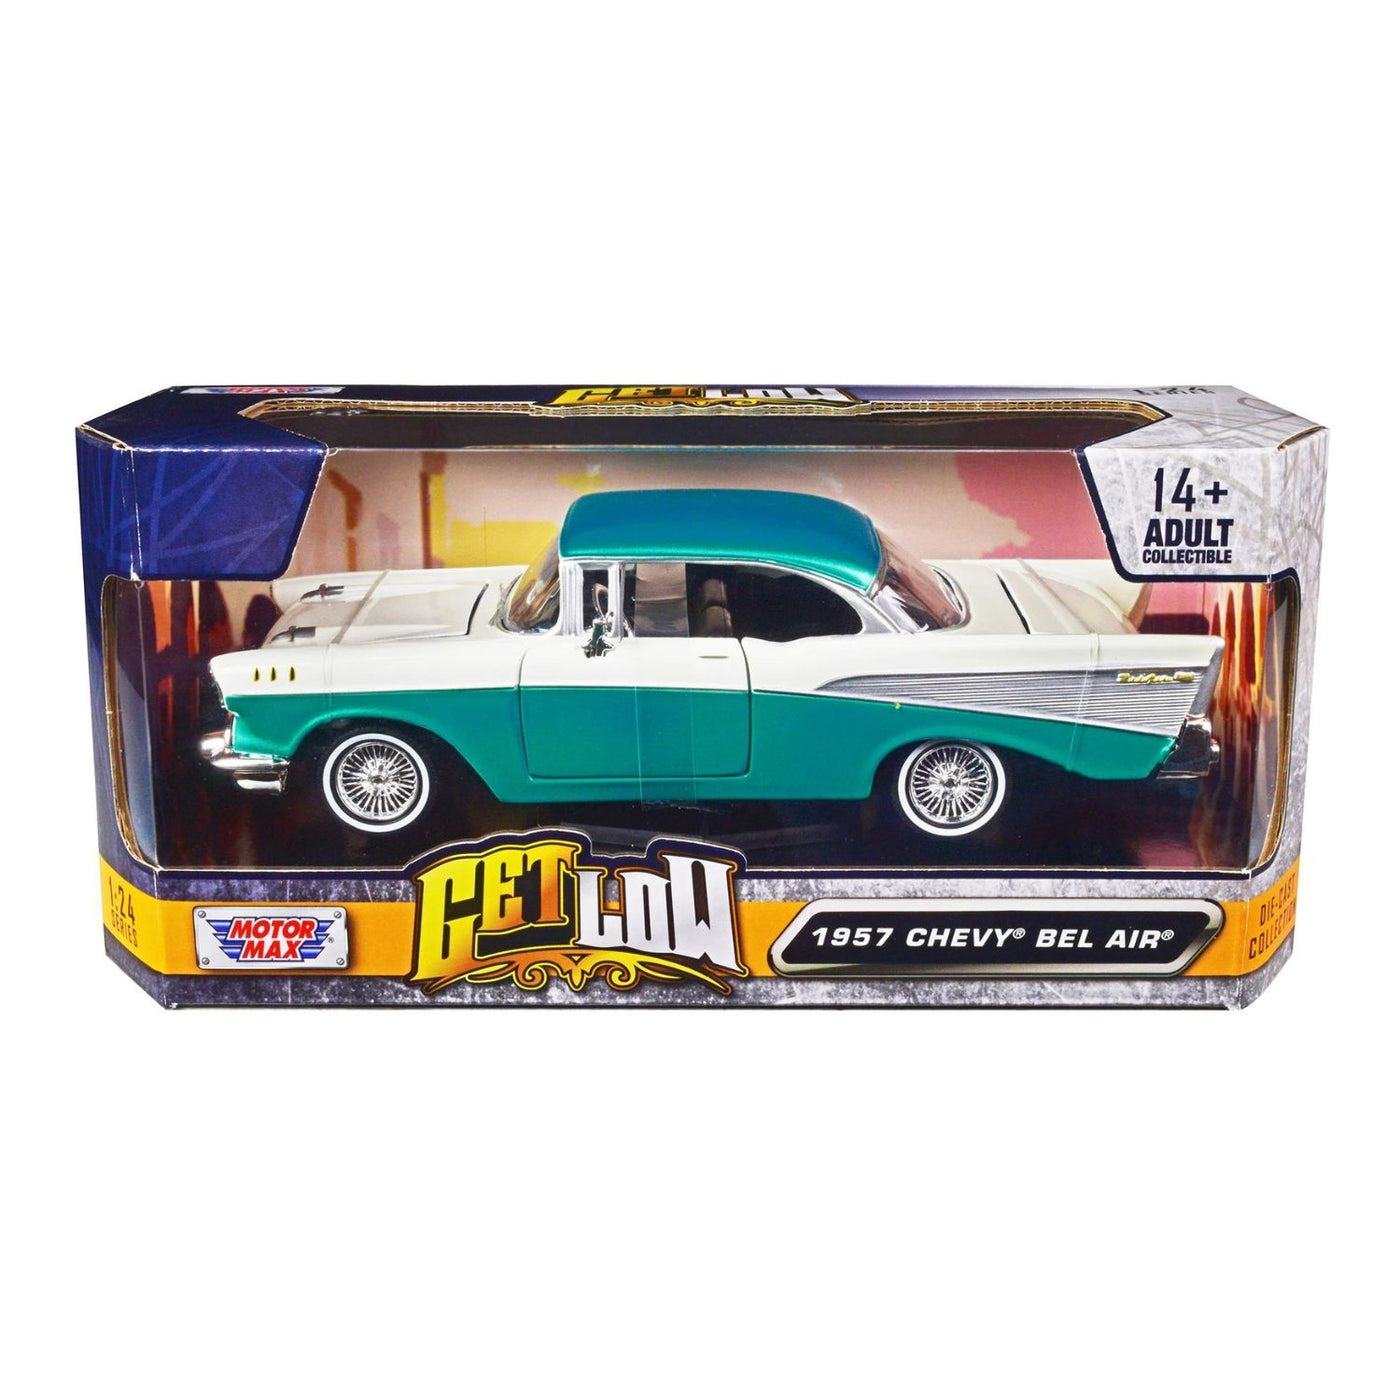 Wall Mount for Maisto 1:18 Scale Diecast Model Car Chevrolet Bel Air